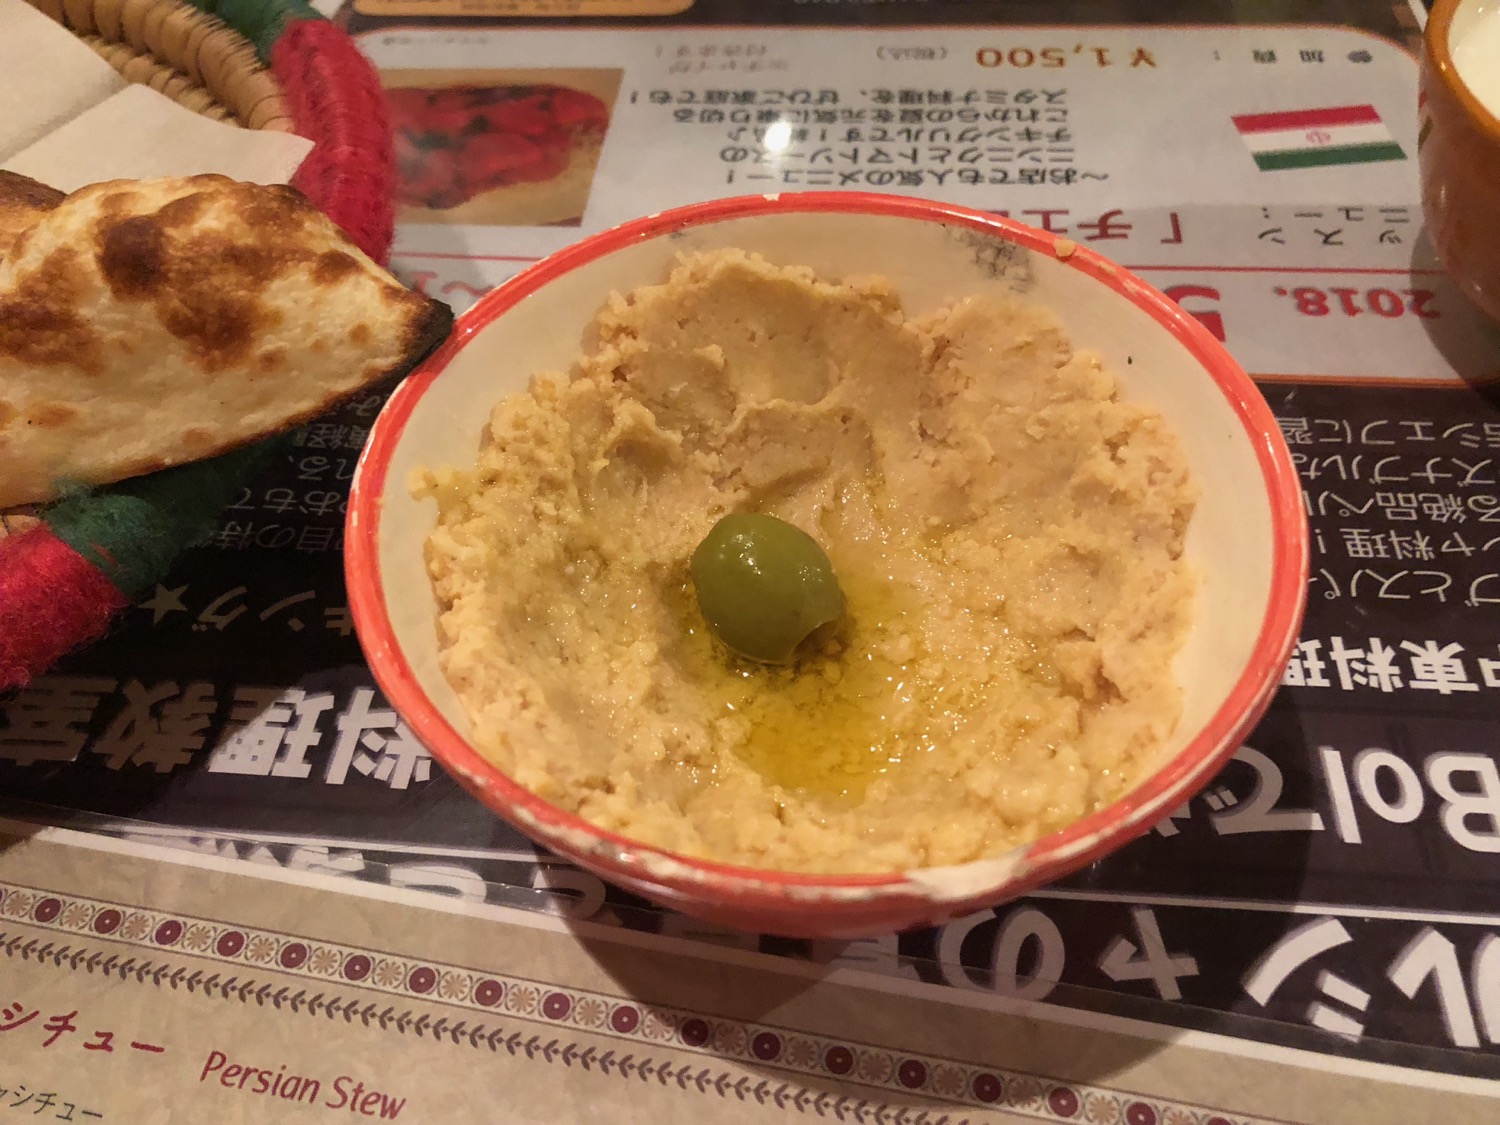 a bowl of hummus with a green olive in it